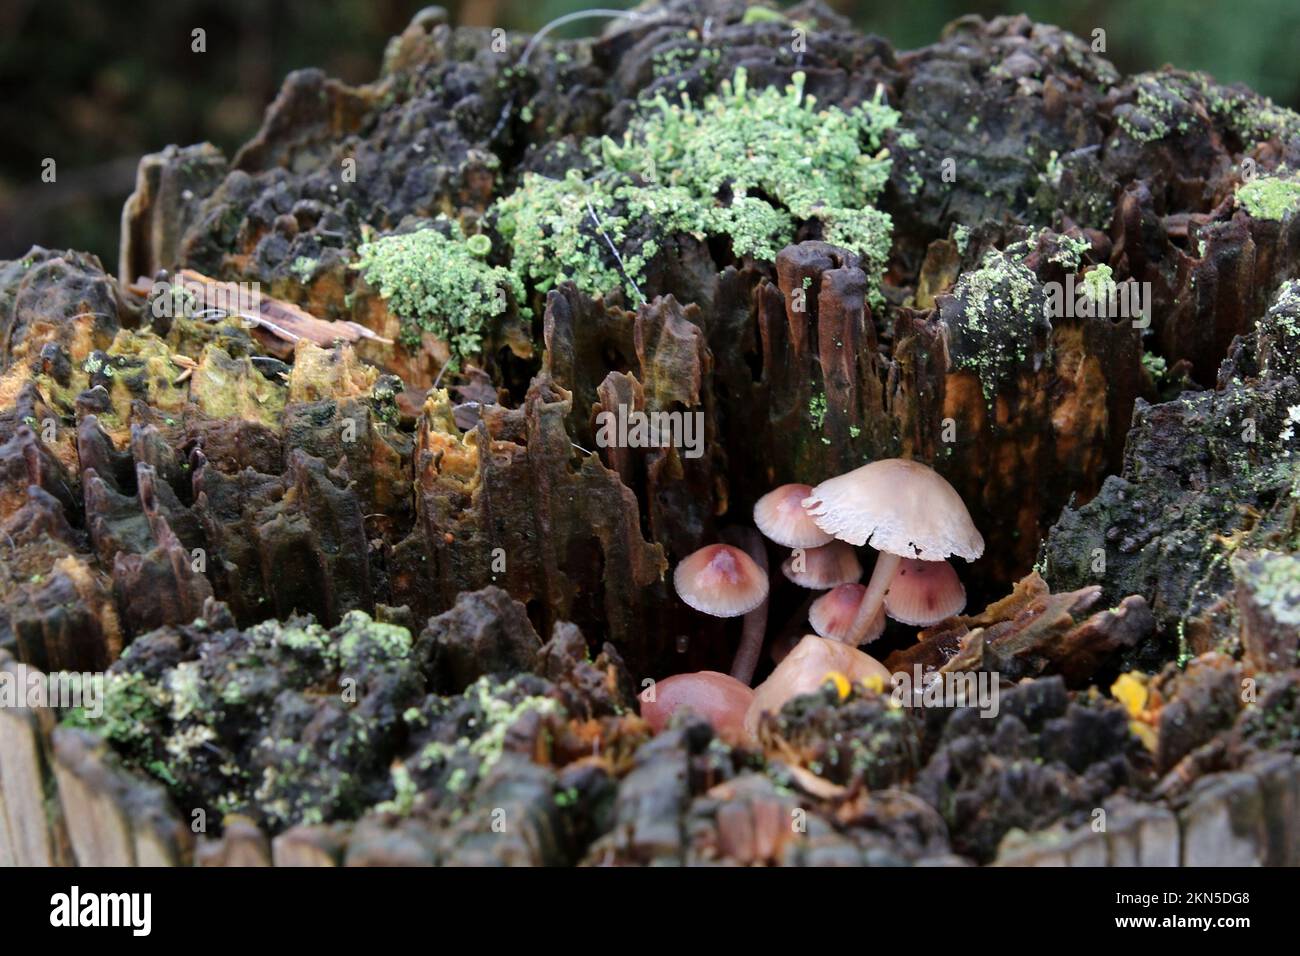 Small  fungi growing in decayed post top Stock Photo